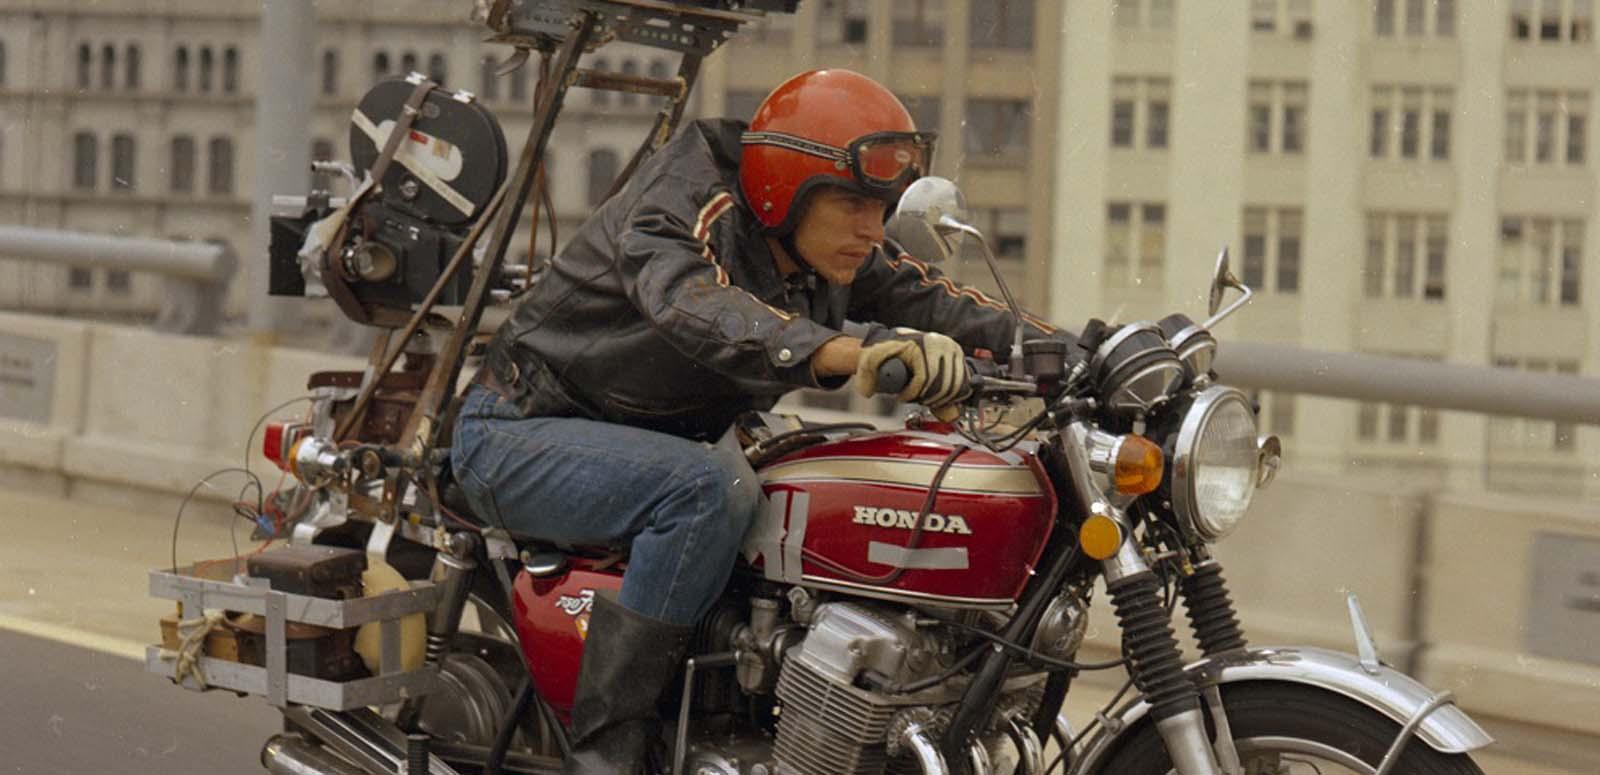 A man rides a motorcycle with a camera mounted on the back.